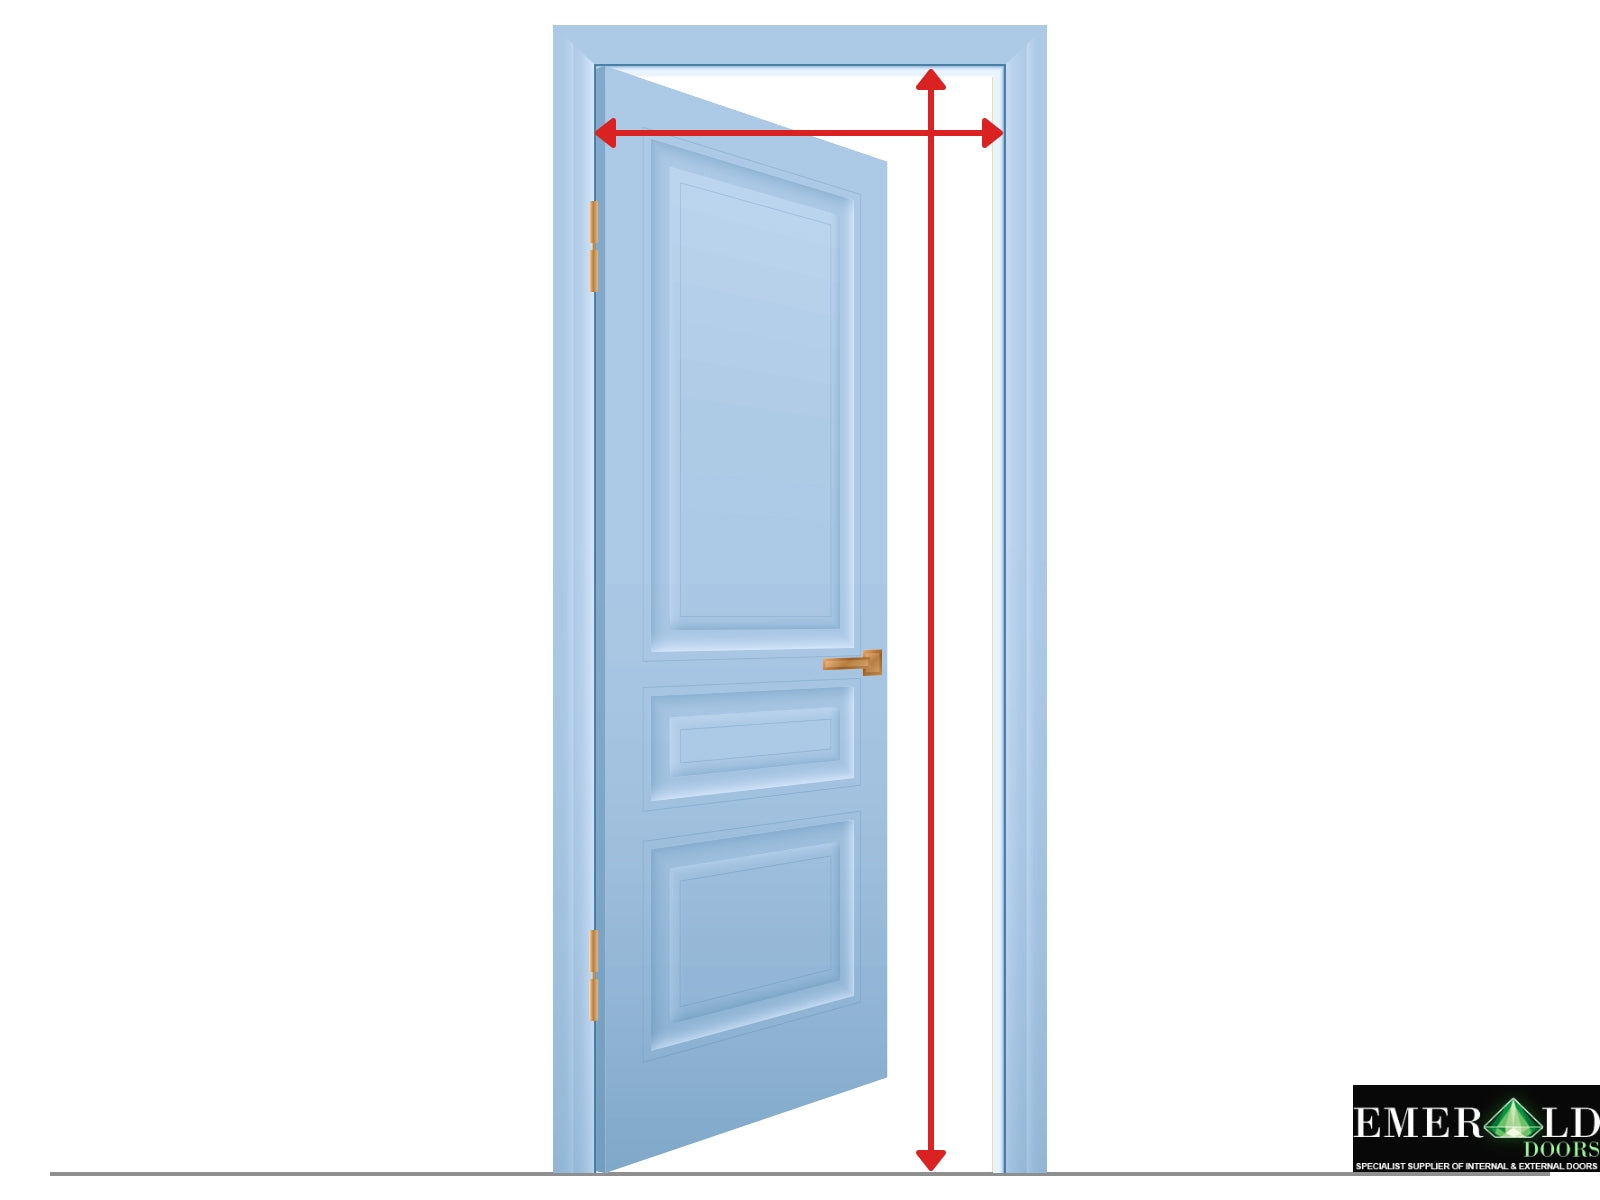 How to measure the framed door space?